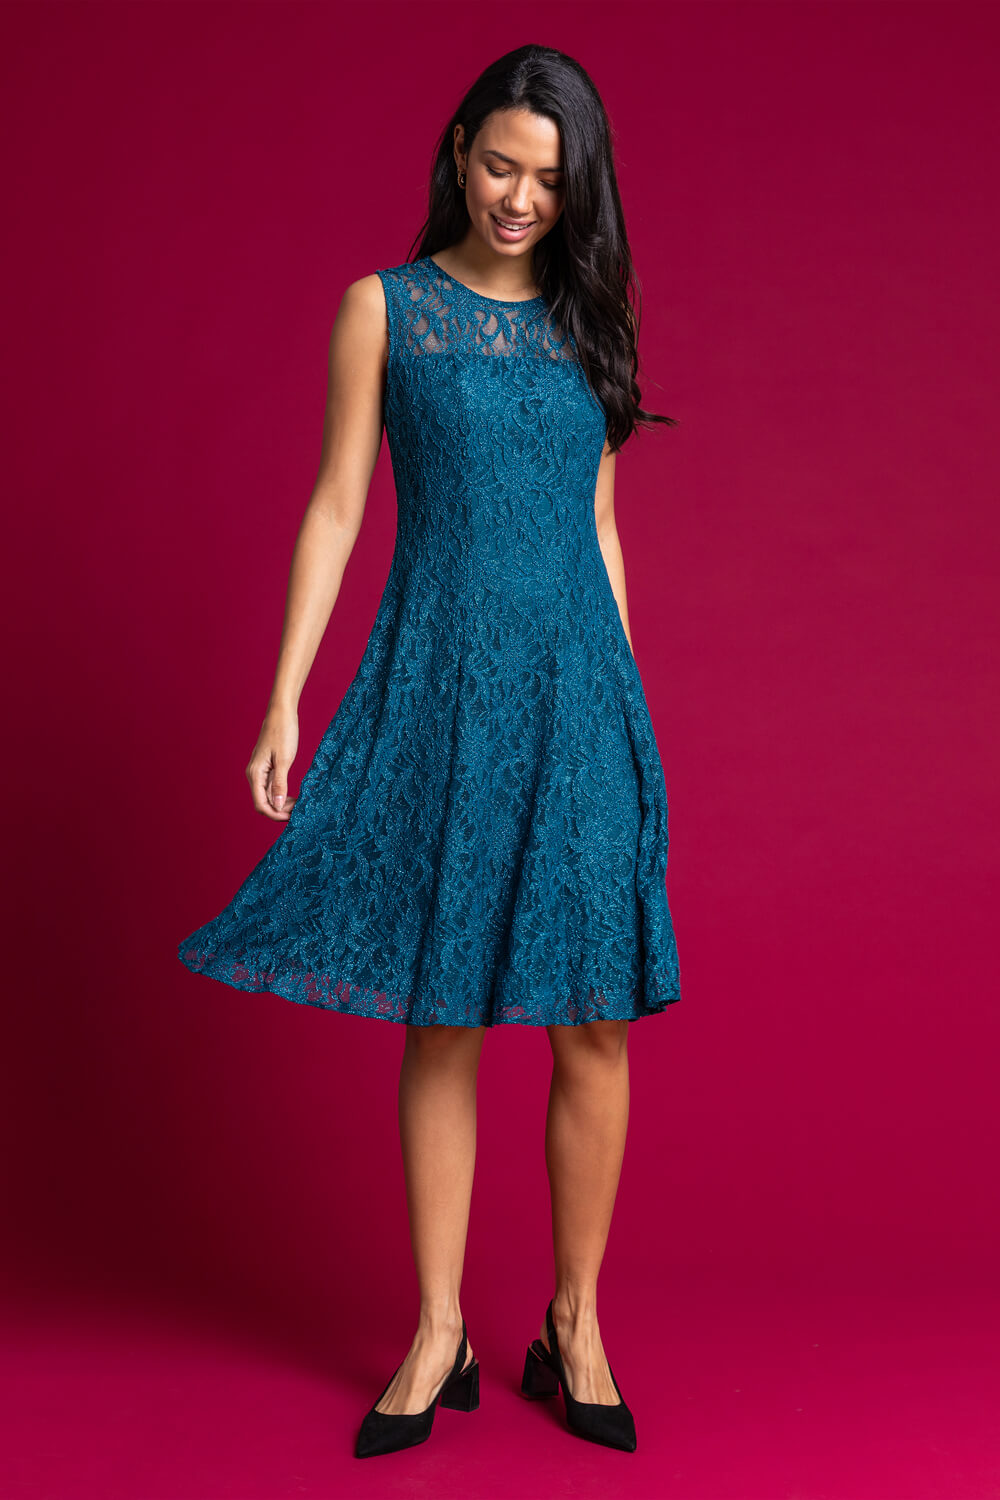 Teal Glitter Lace Fit And Flare Dress, Image 3 of 4